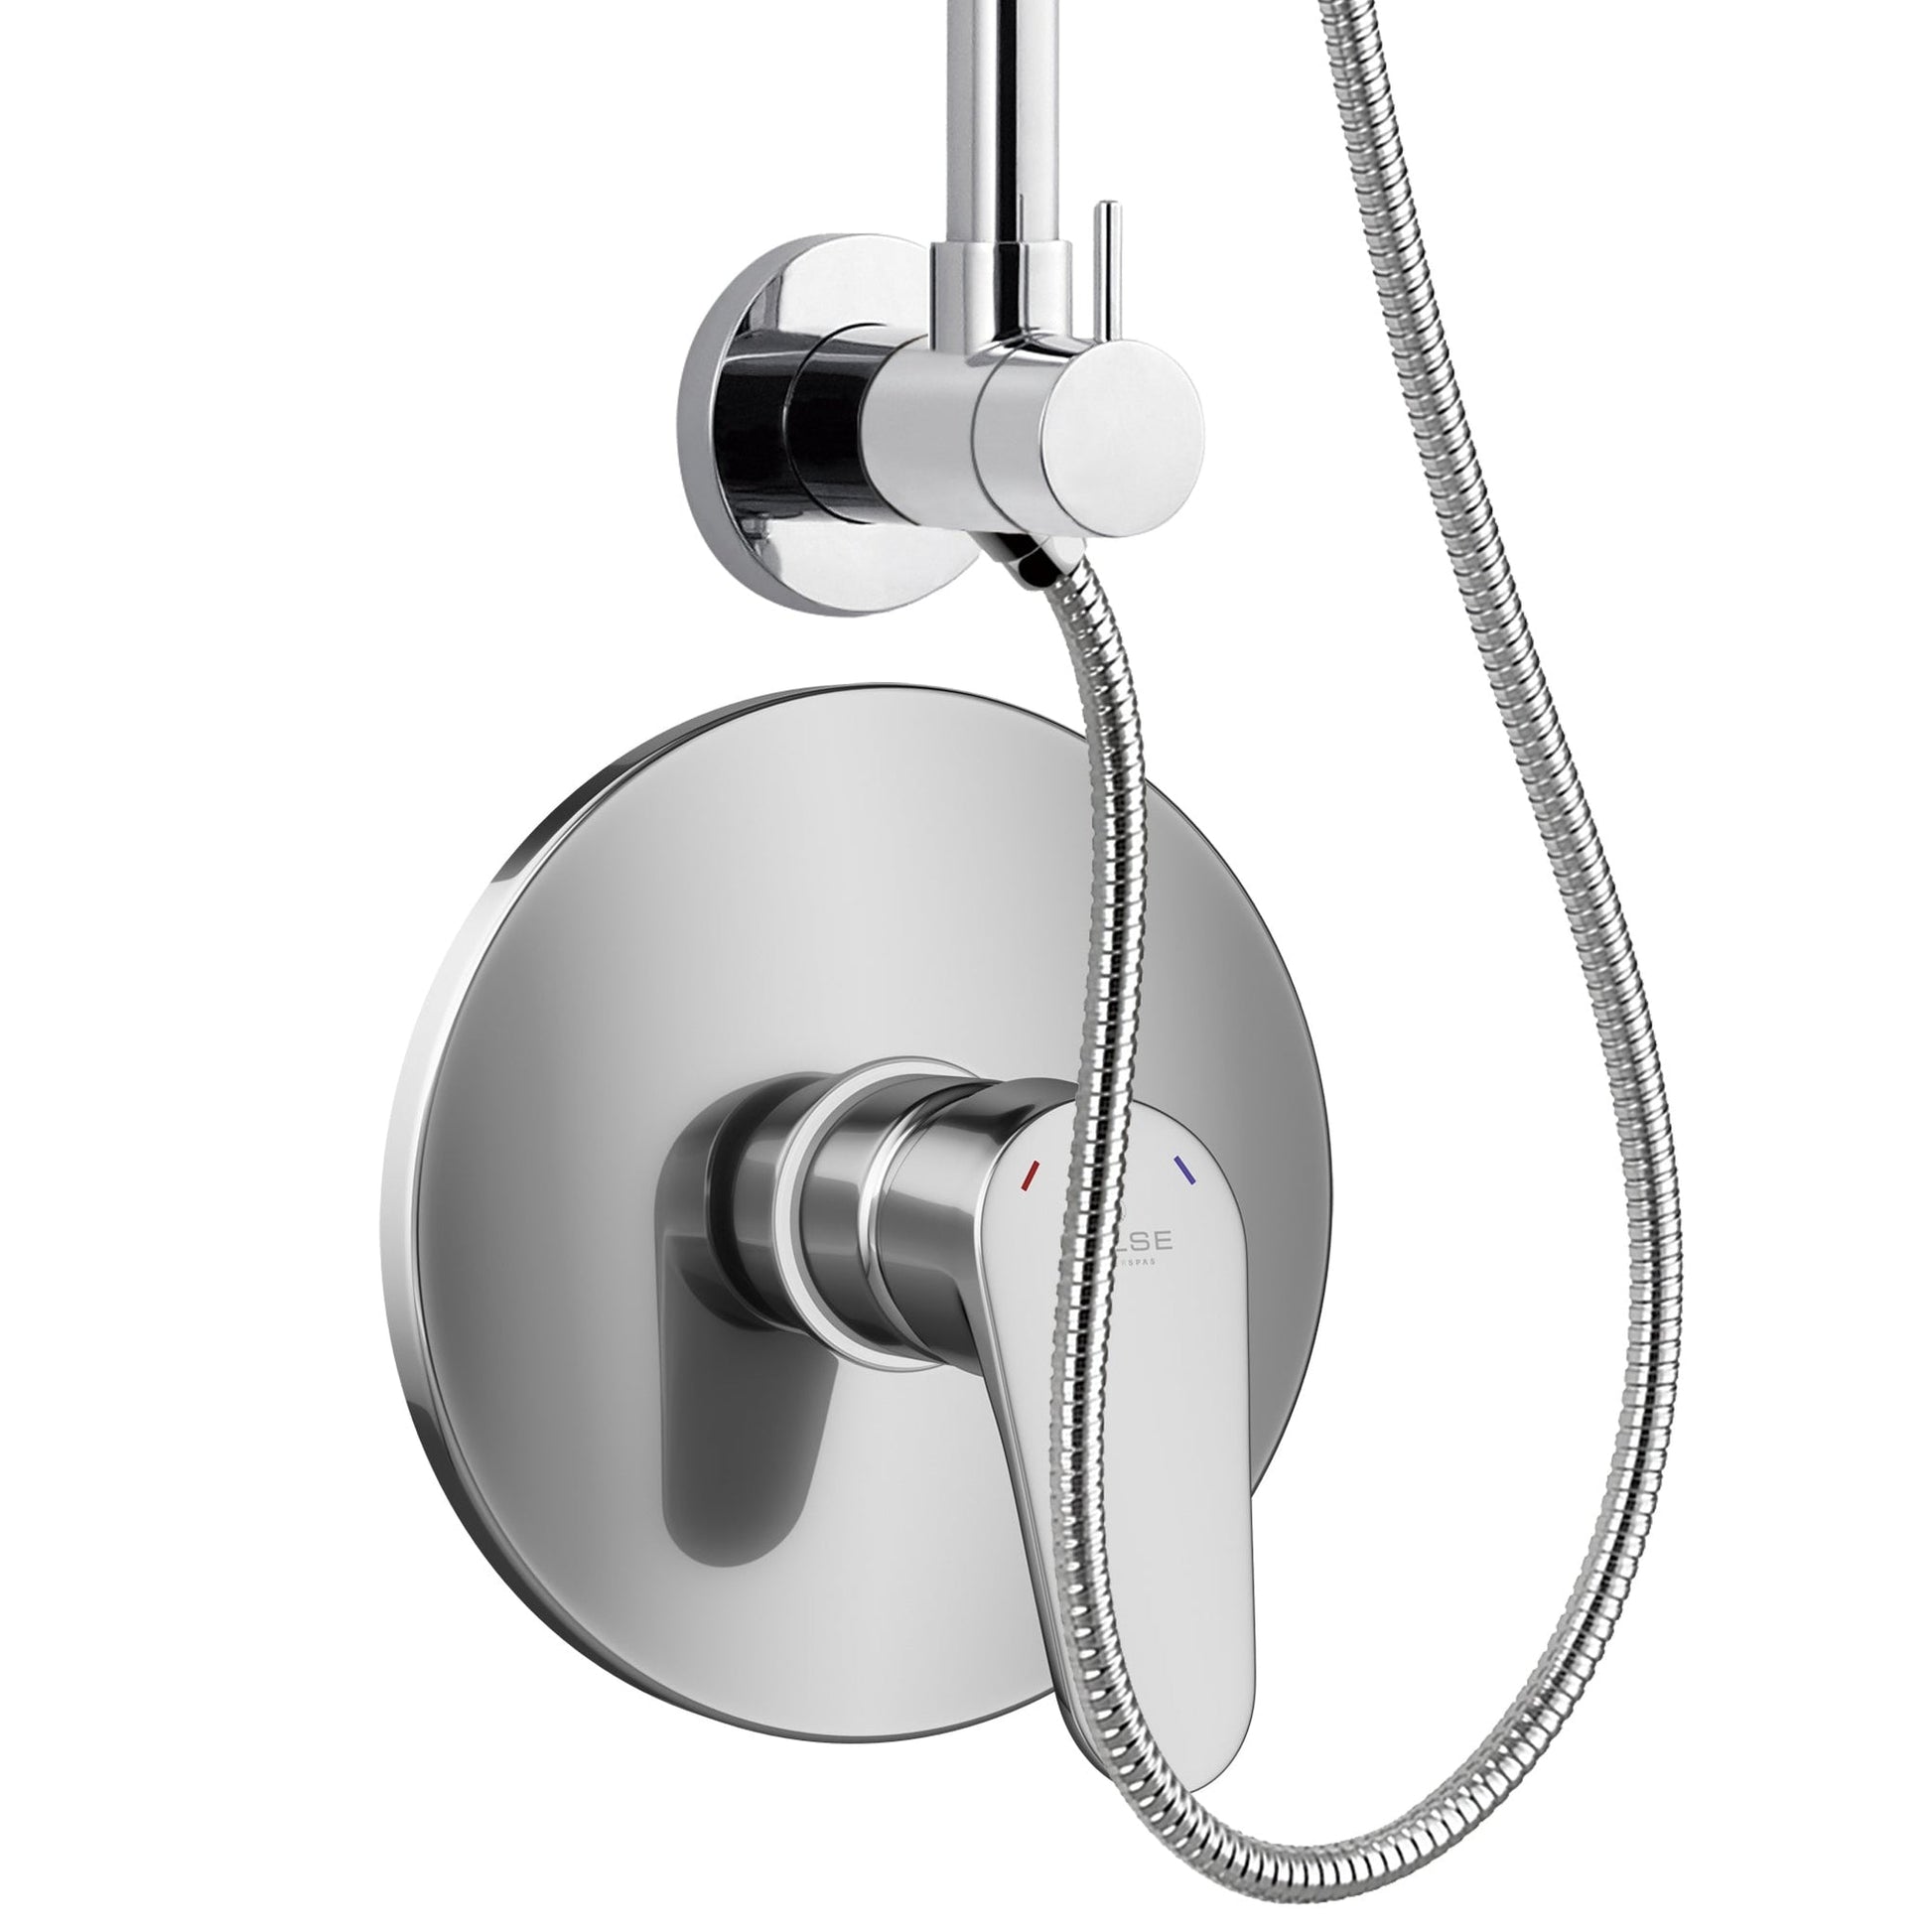 PULSE ShowerSpas SeaBreeze II 1.8 GPM Rain Shower System and Valve Combo in Chrome Finish With 3-Function Hand Shower